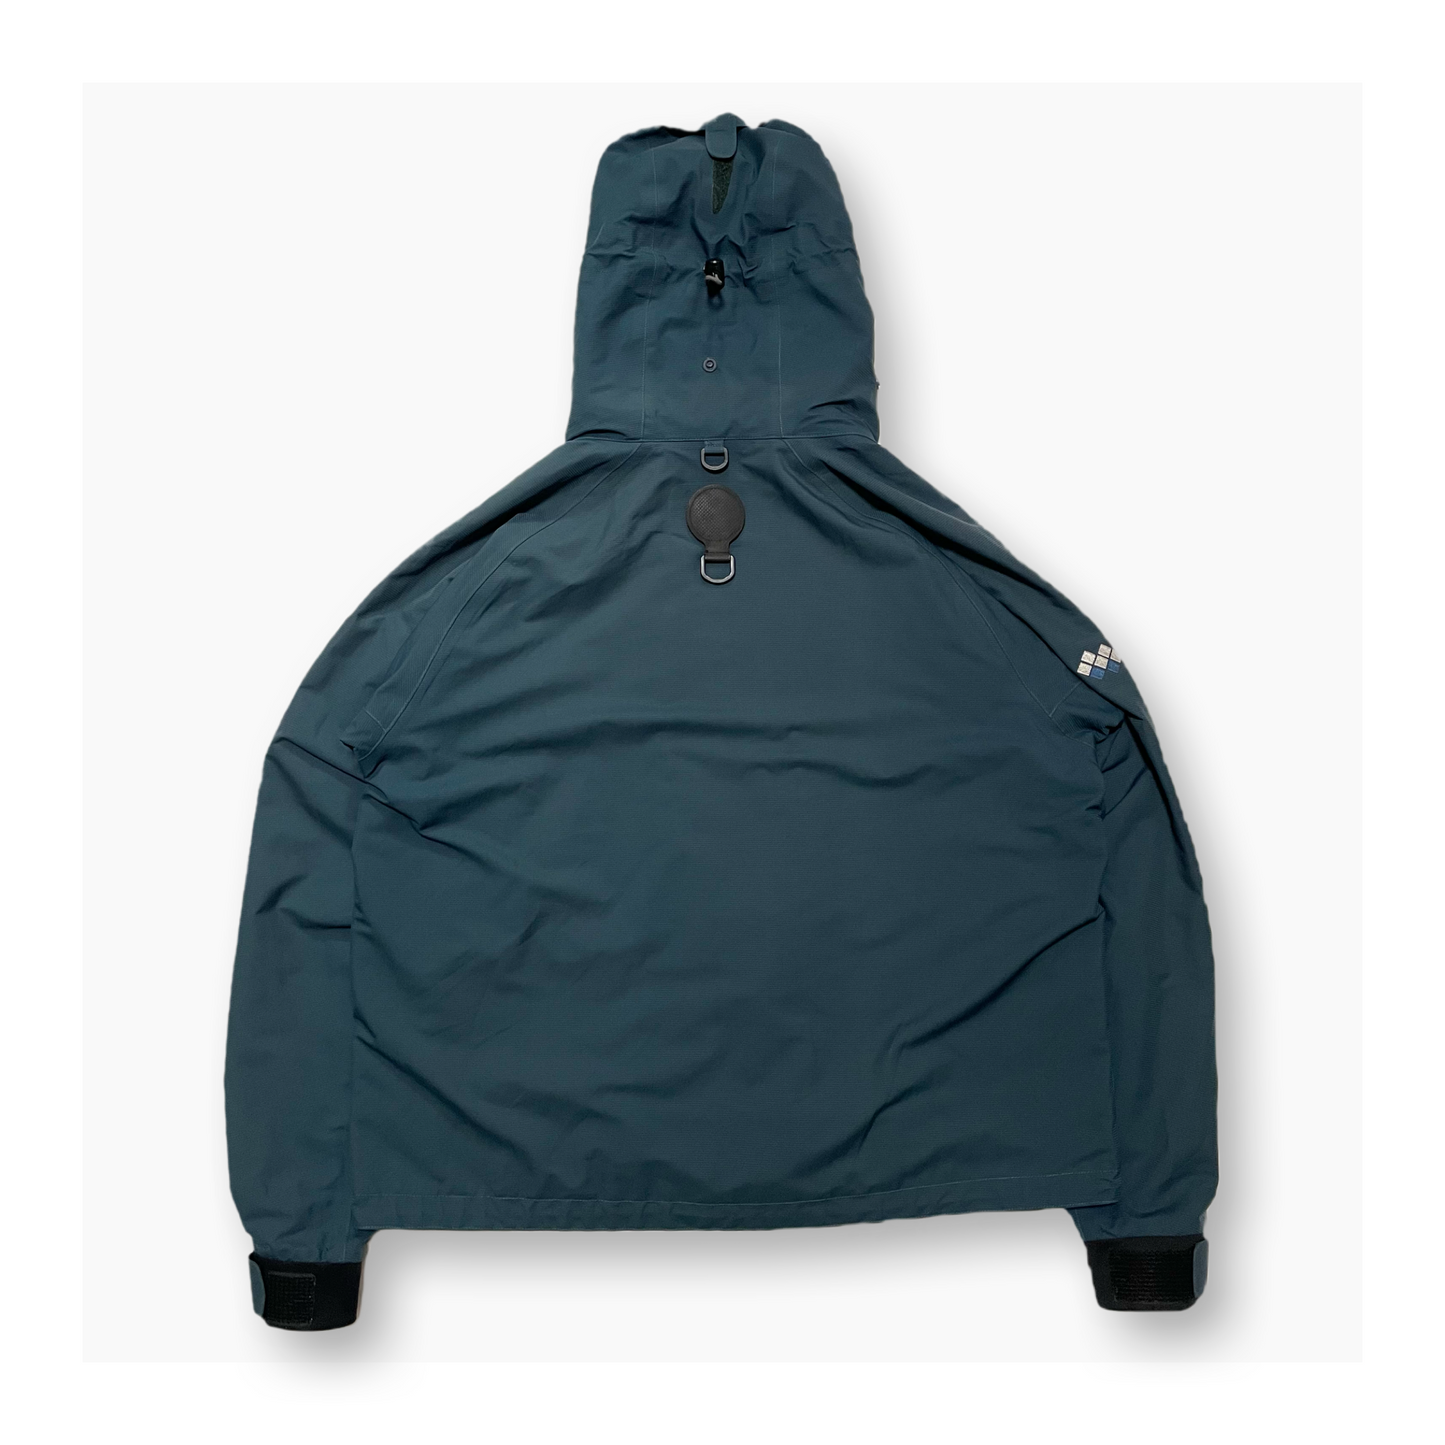 mont-bell Wading Shell Jacket